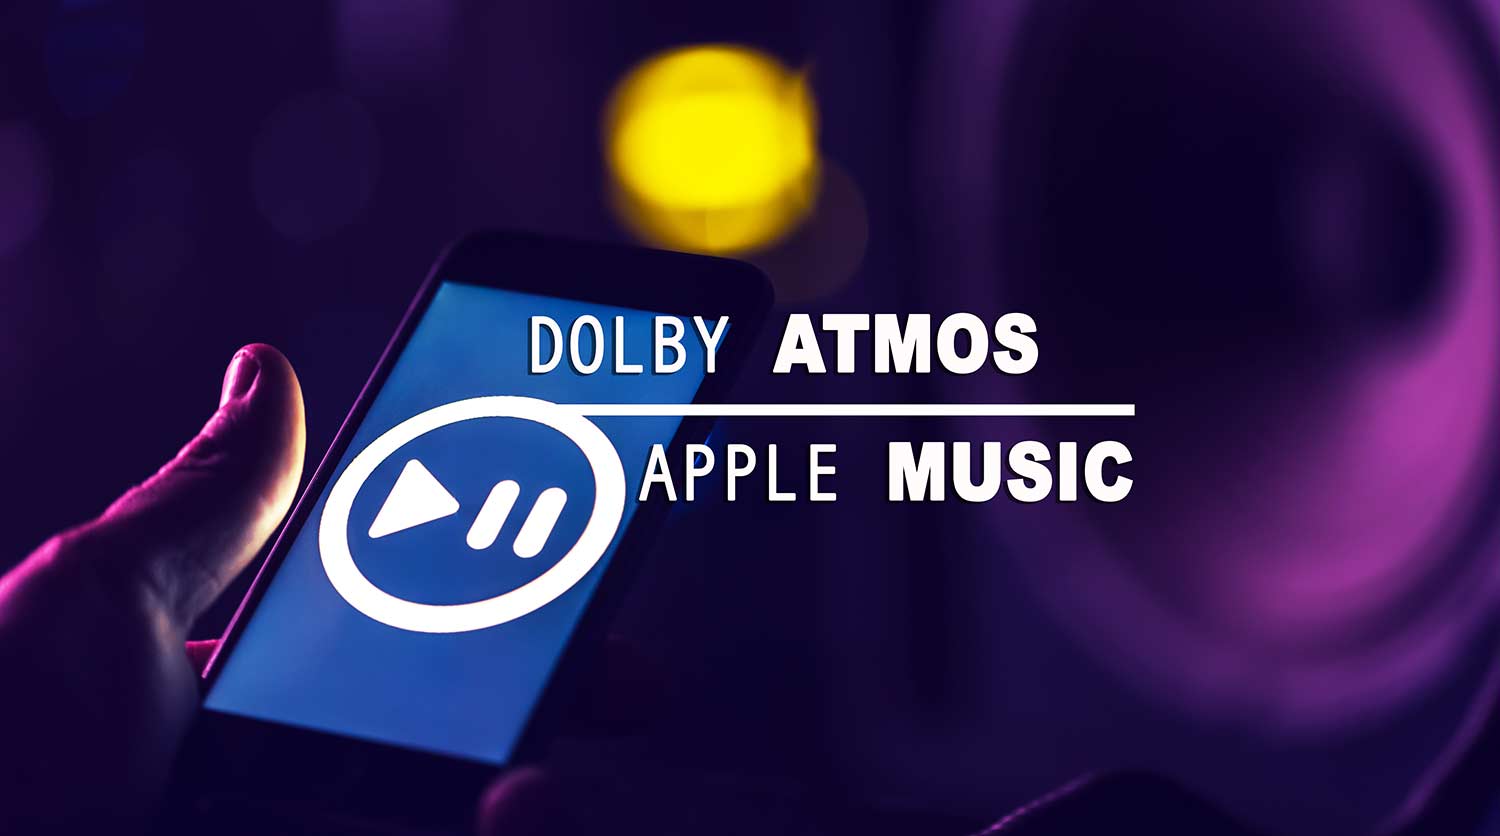 Want to Work in Dolby Atmos? Here Are the DAWs You Should Check Out